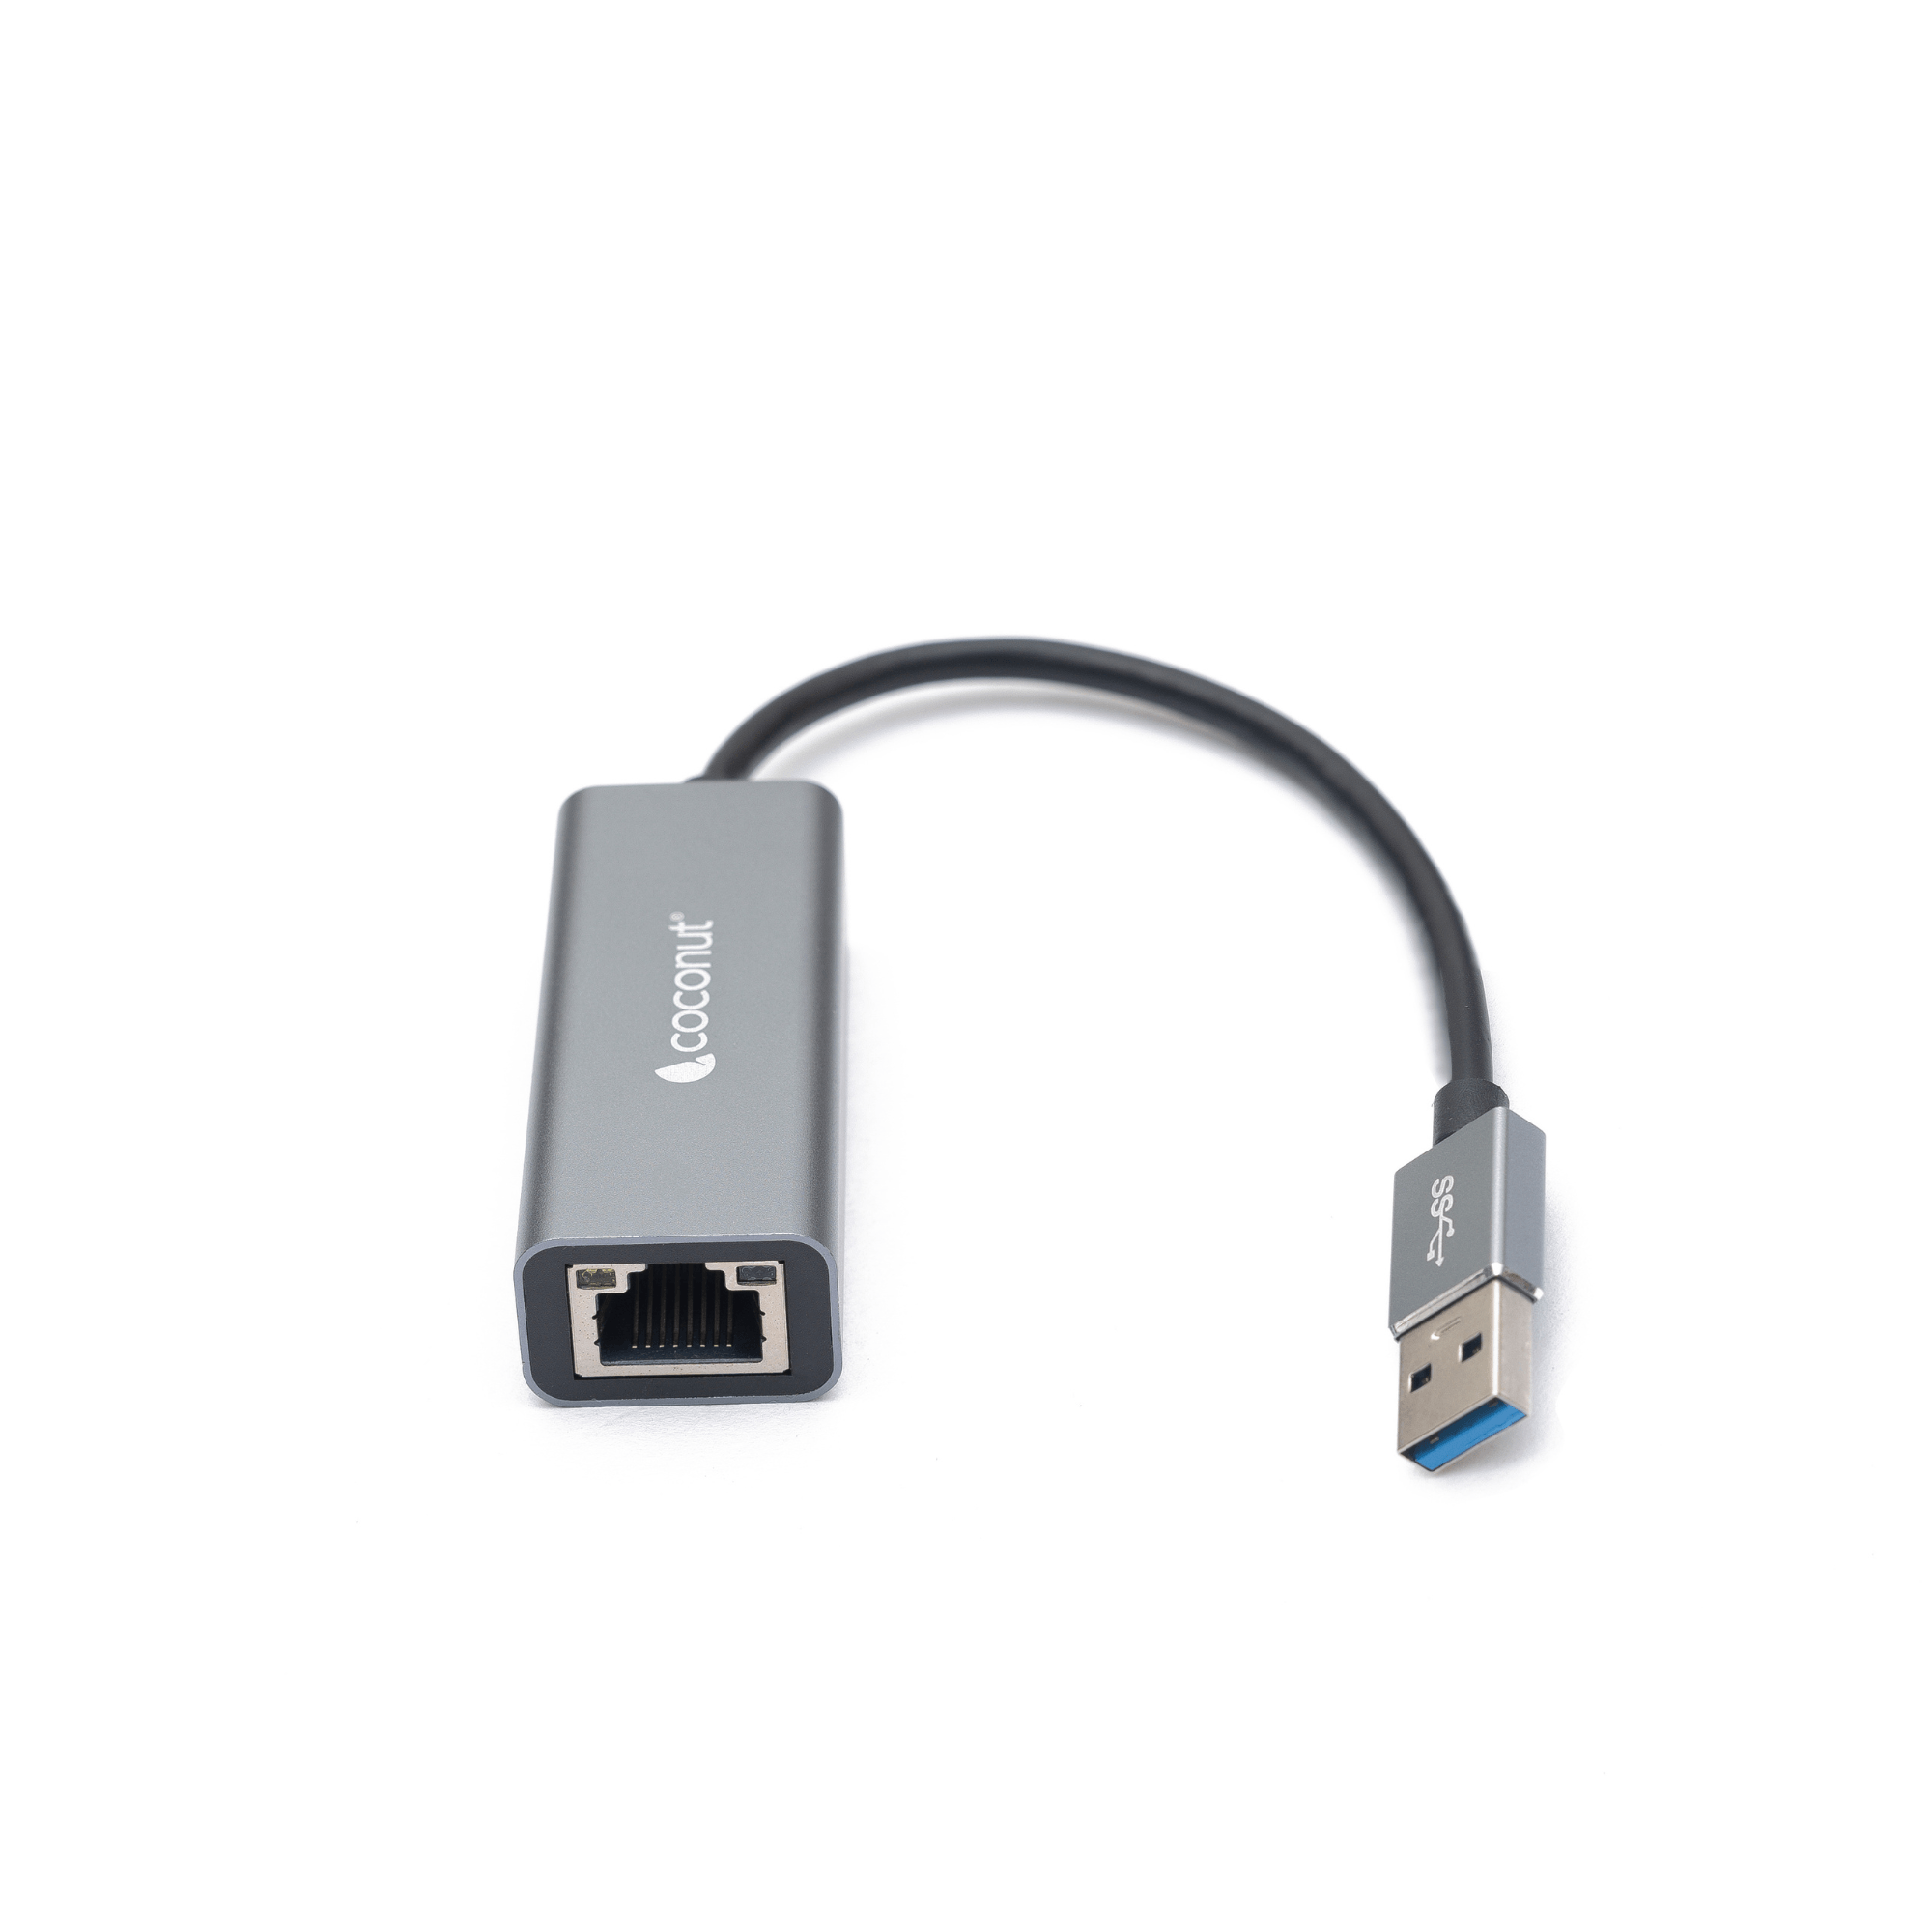 USB to LAN Ethernet Adapter,Type C to RJ45 up to 1000Mbps| Metal body, Plug & Play, Compact Design